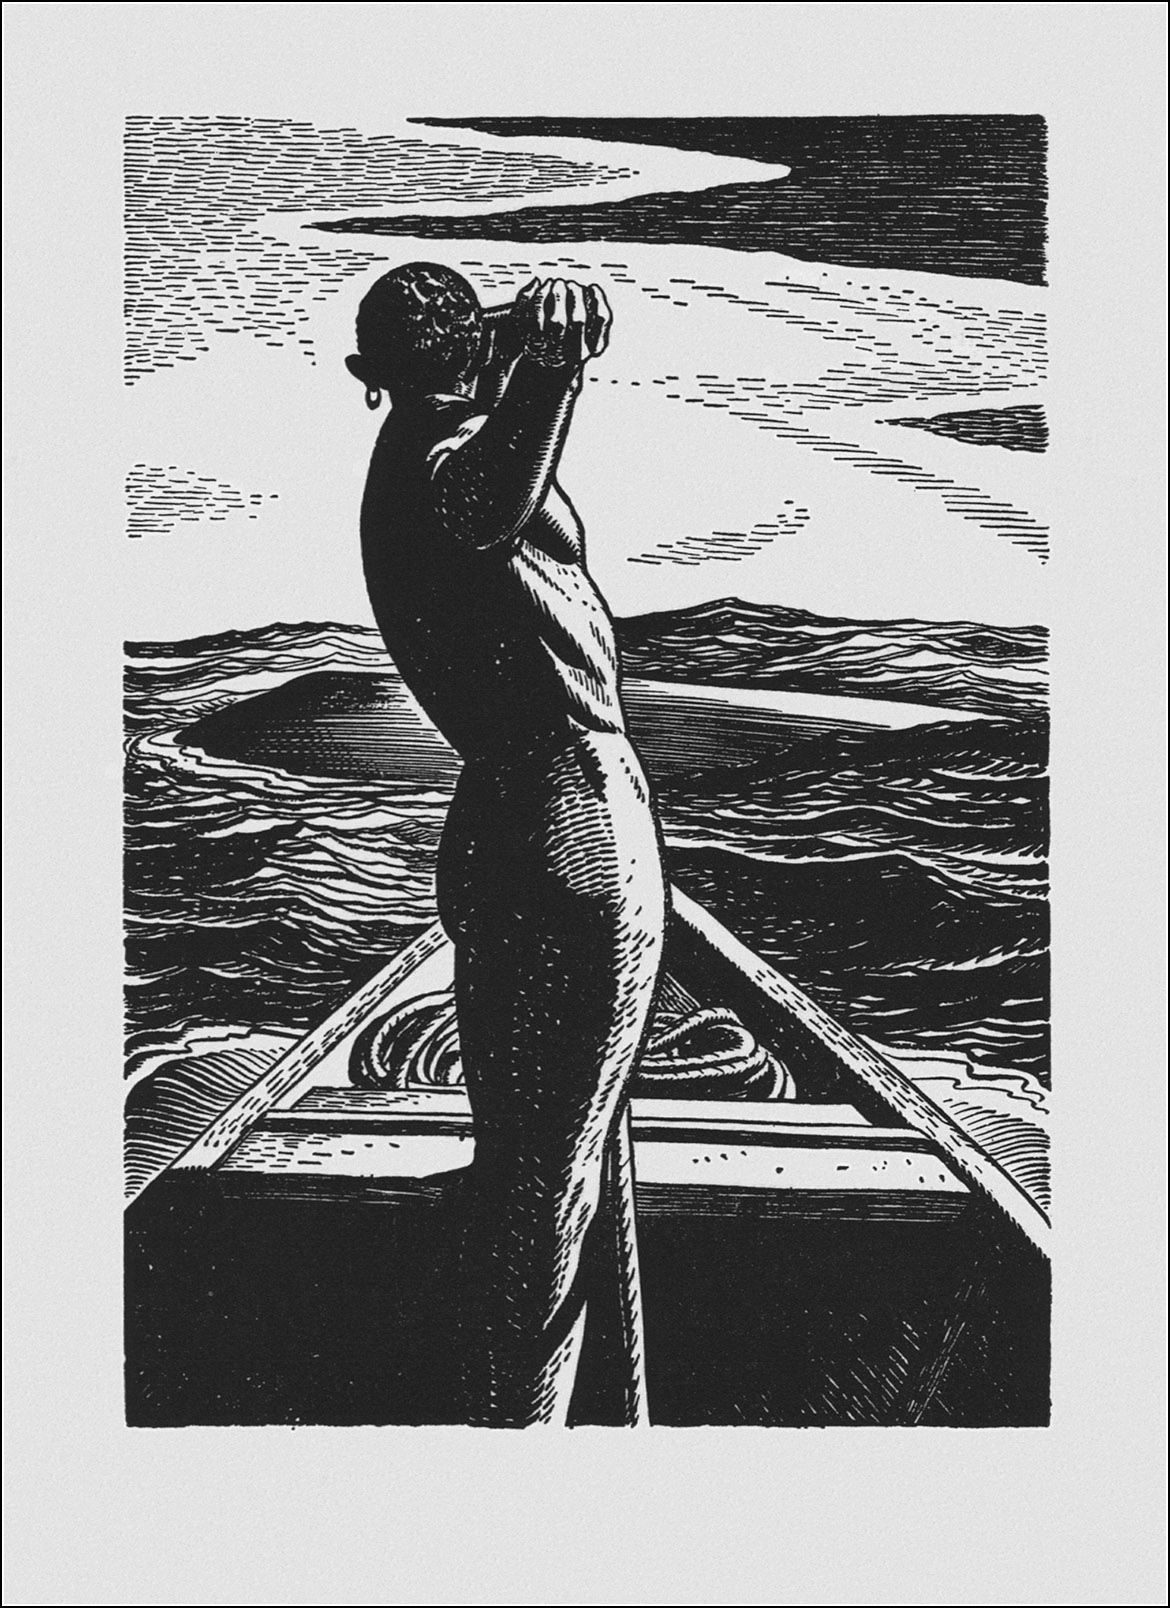 Rockwell kent's drawings for moby dick